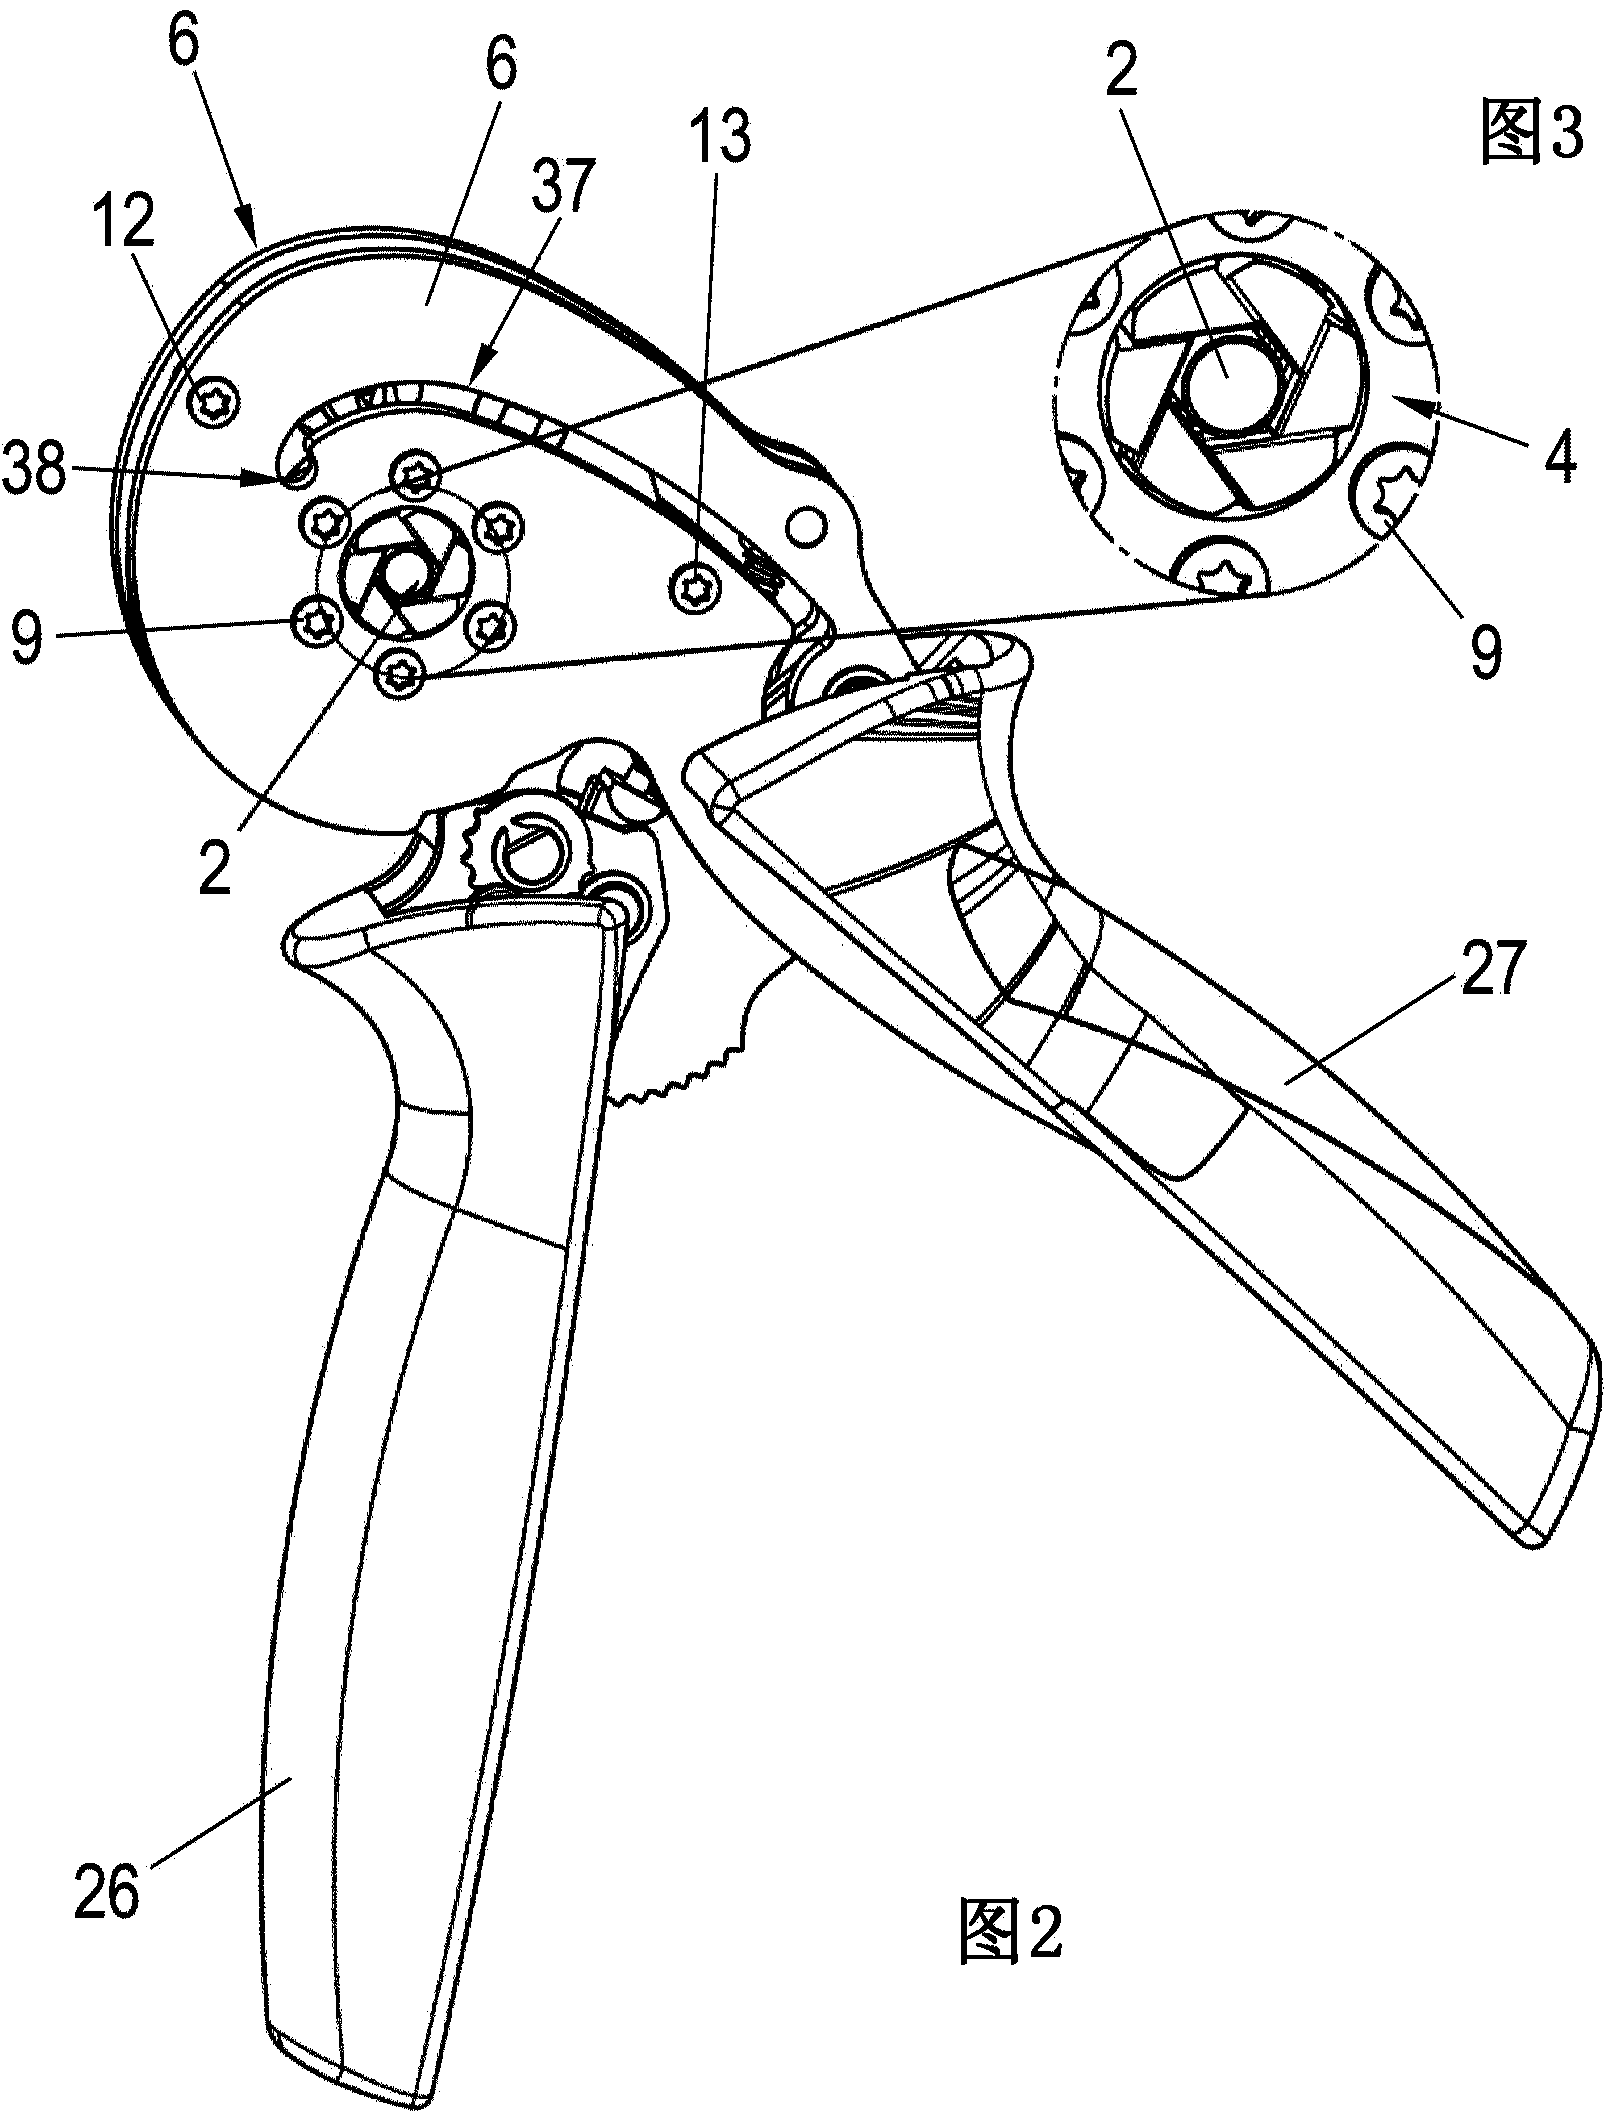 Crimping tool for wire end ferrules